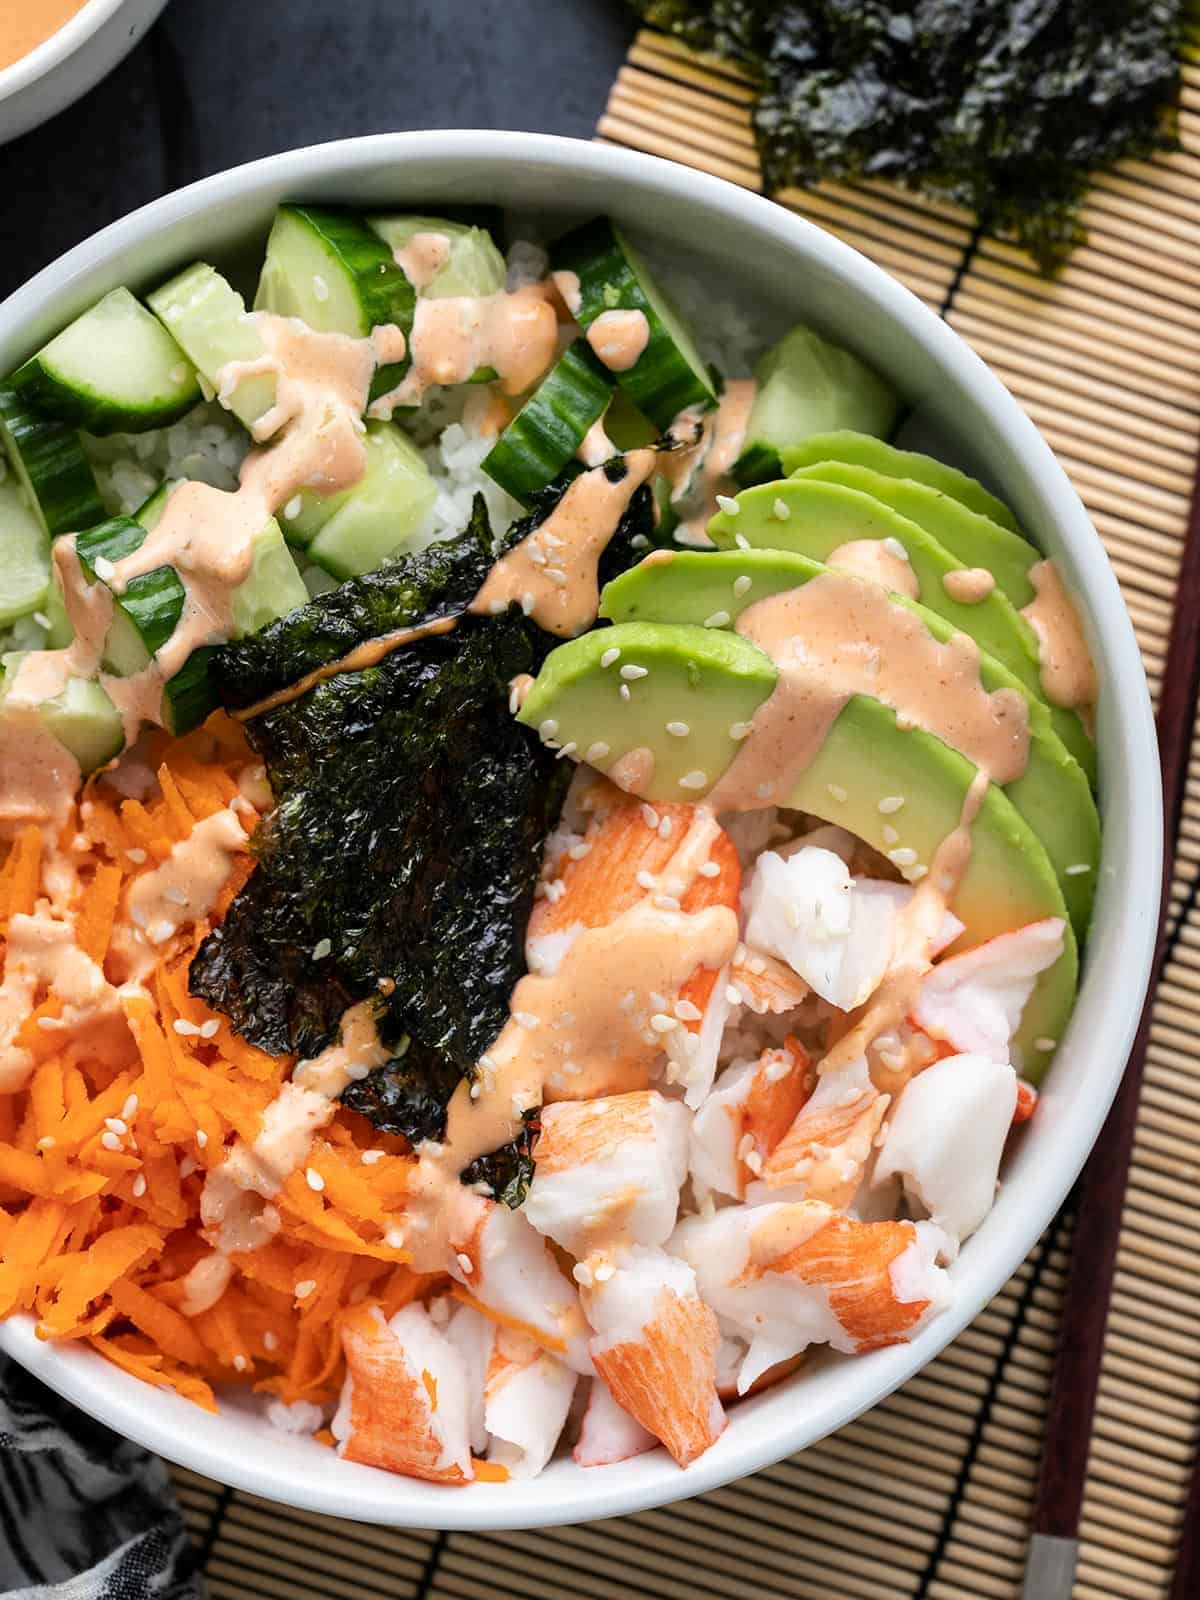 A bowl of Asian salad with carrots and avocado, perfect for those who love imitation crab recipes.